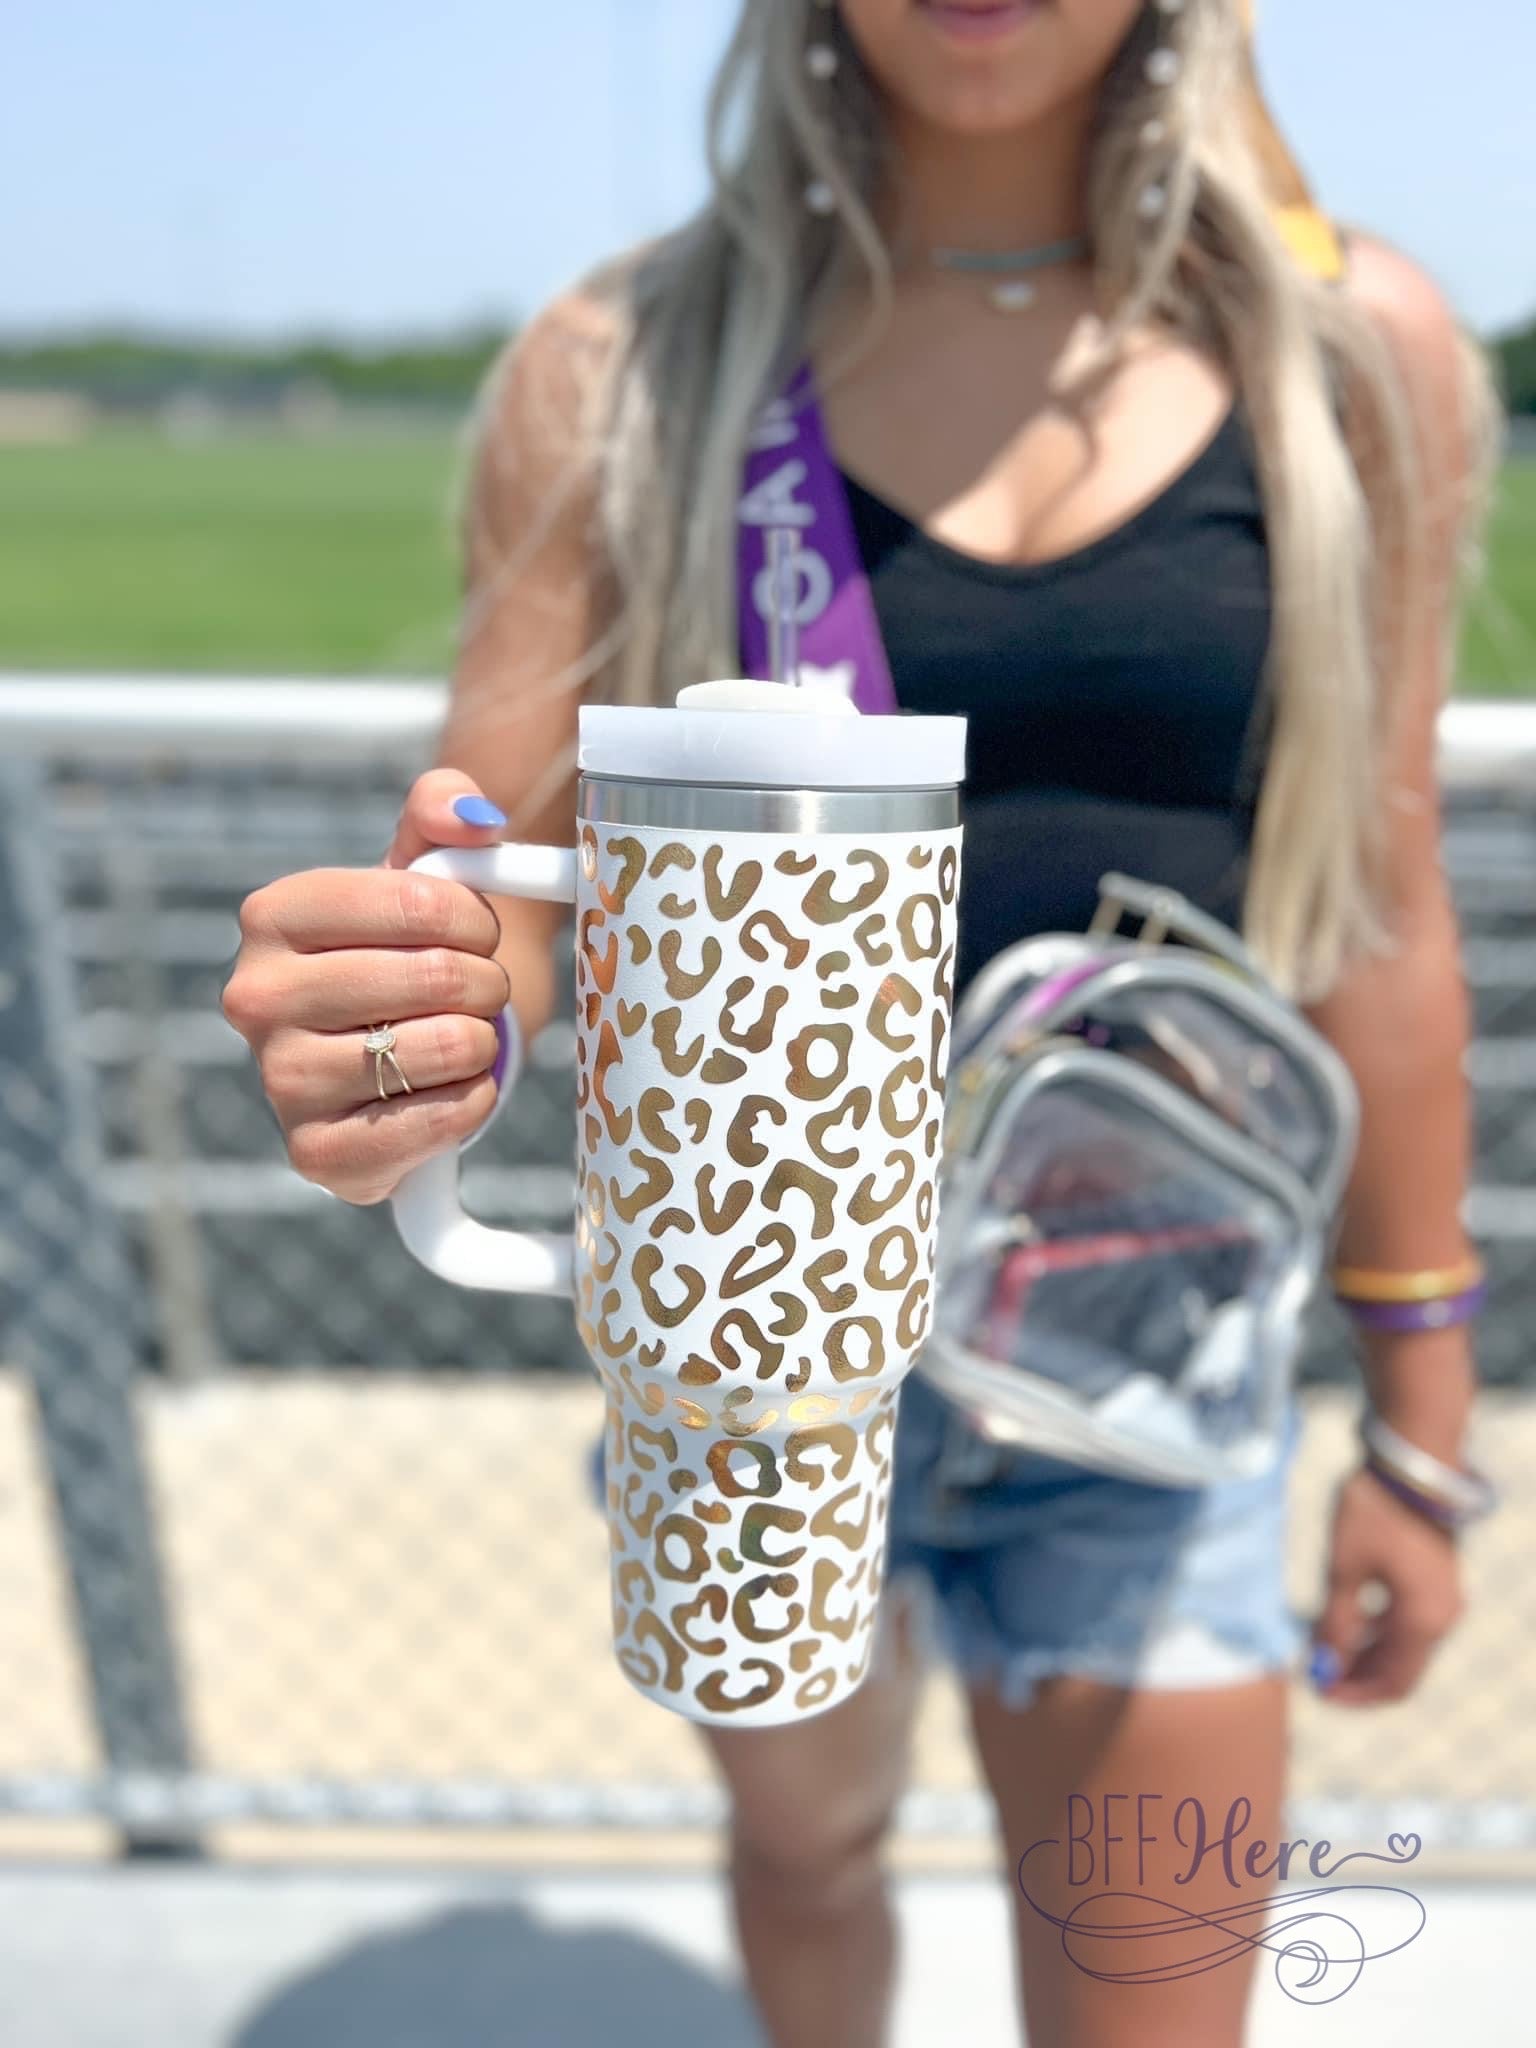 40 oz Iridescent Leopard Print Tumbler with Handle in Hot Pink